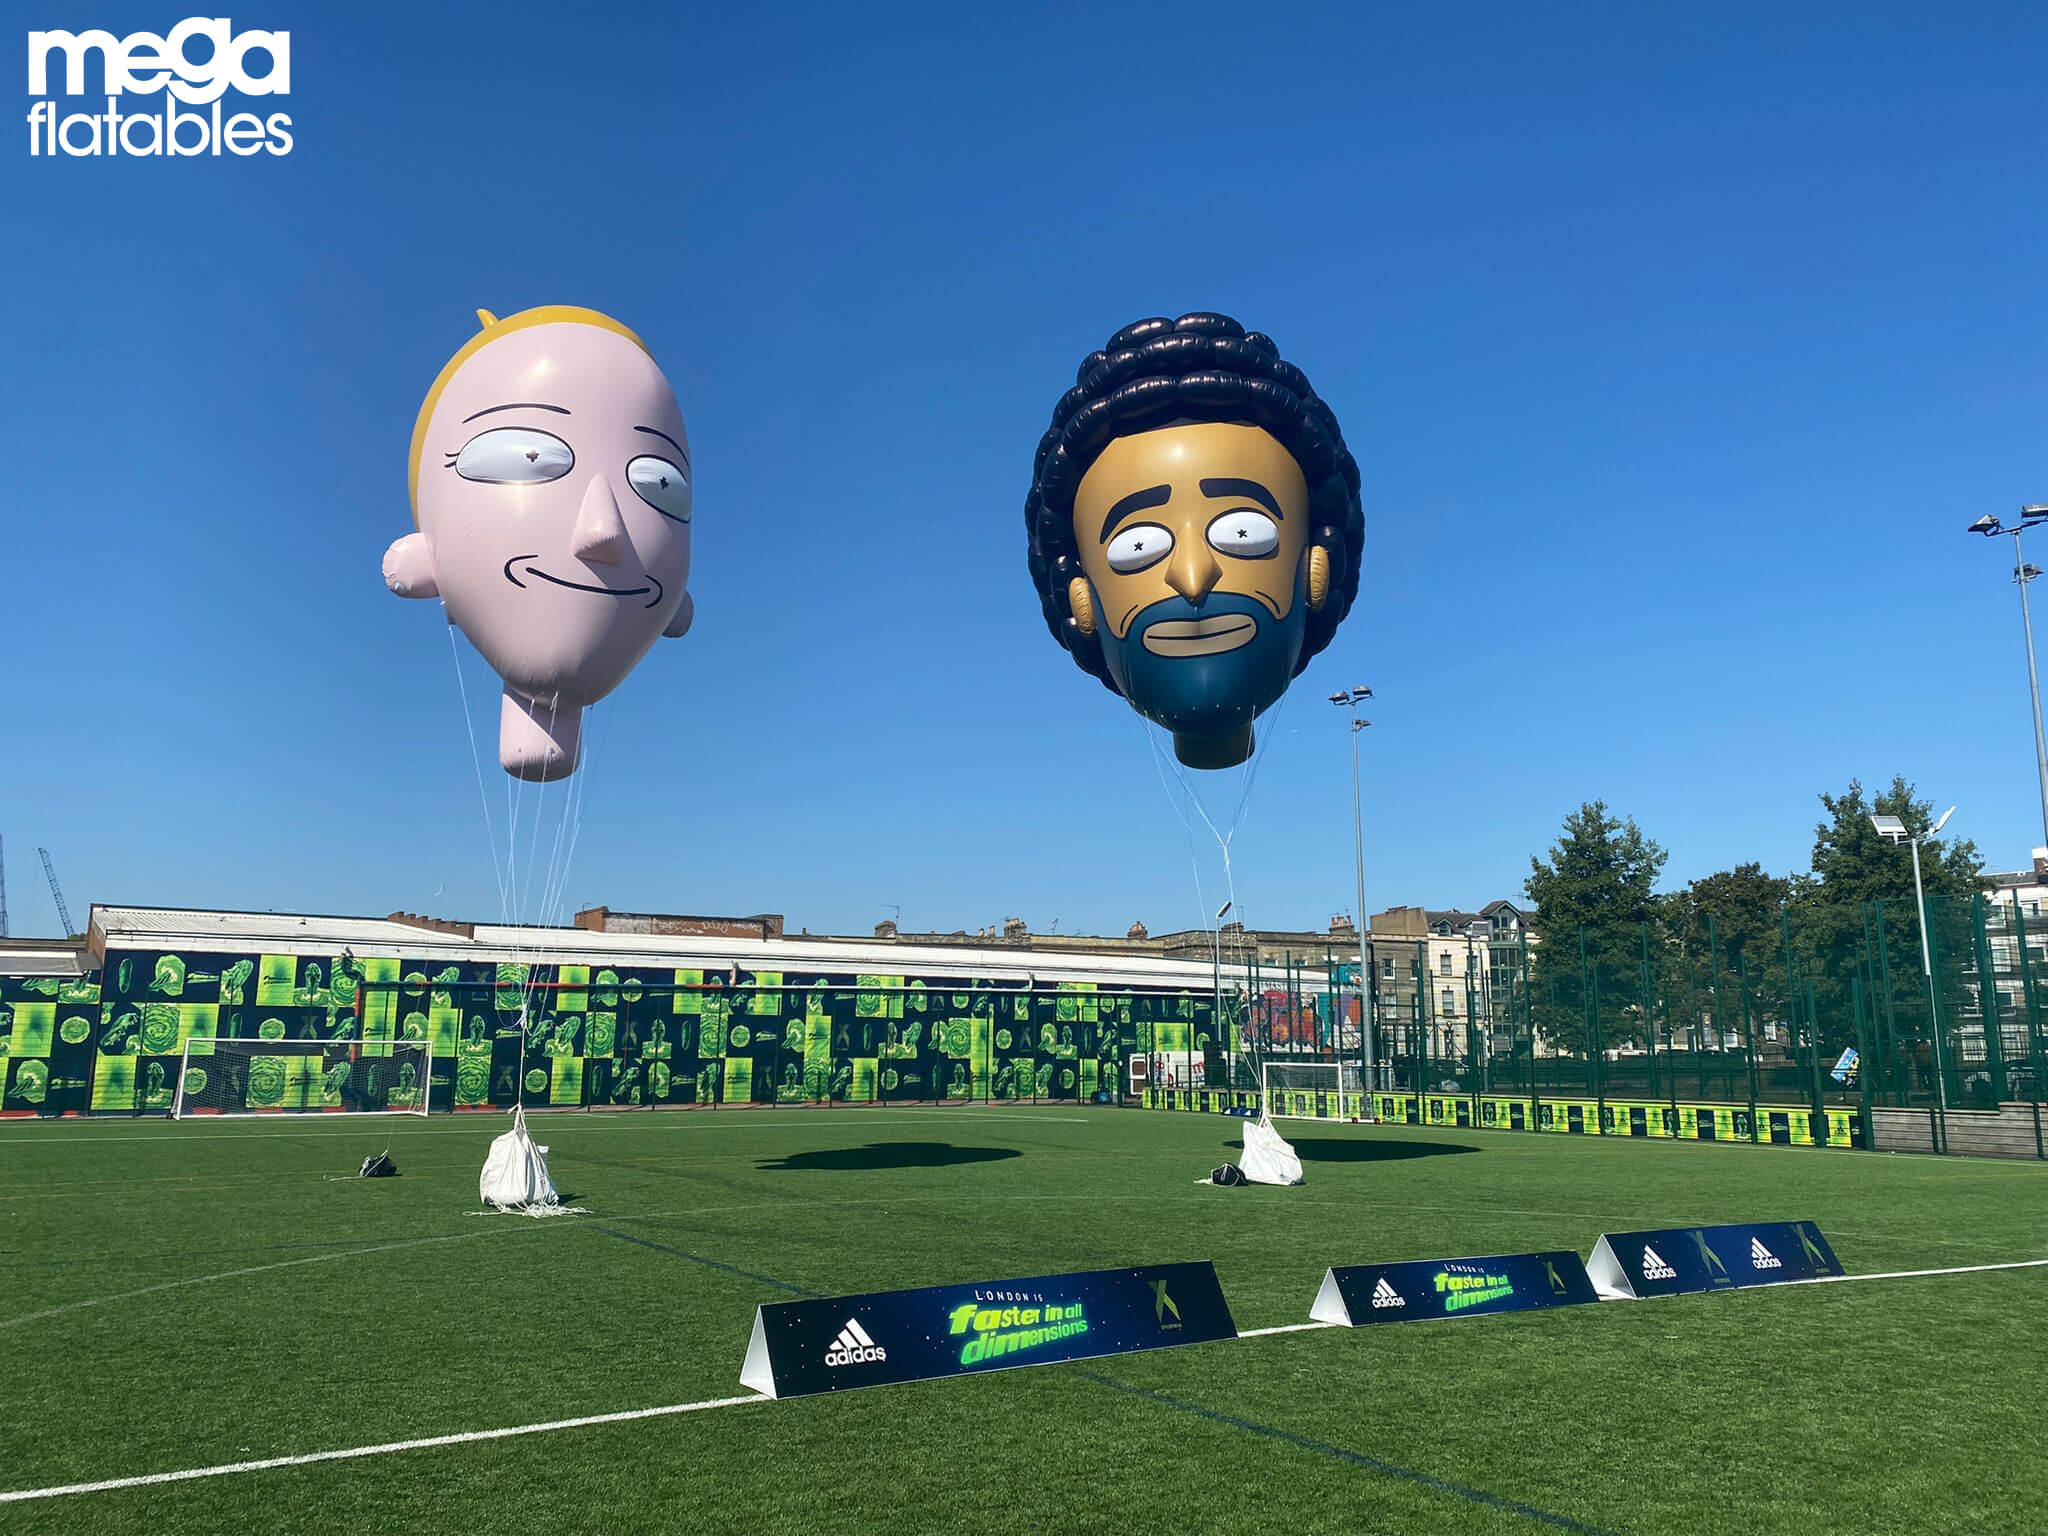 Inflatable character heads